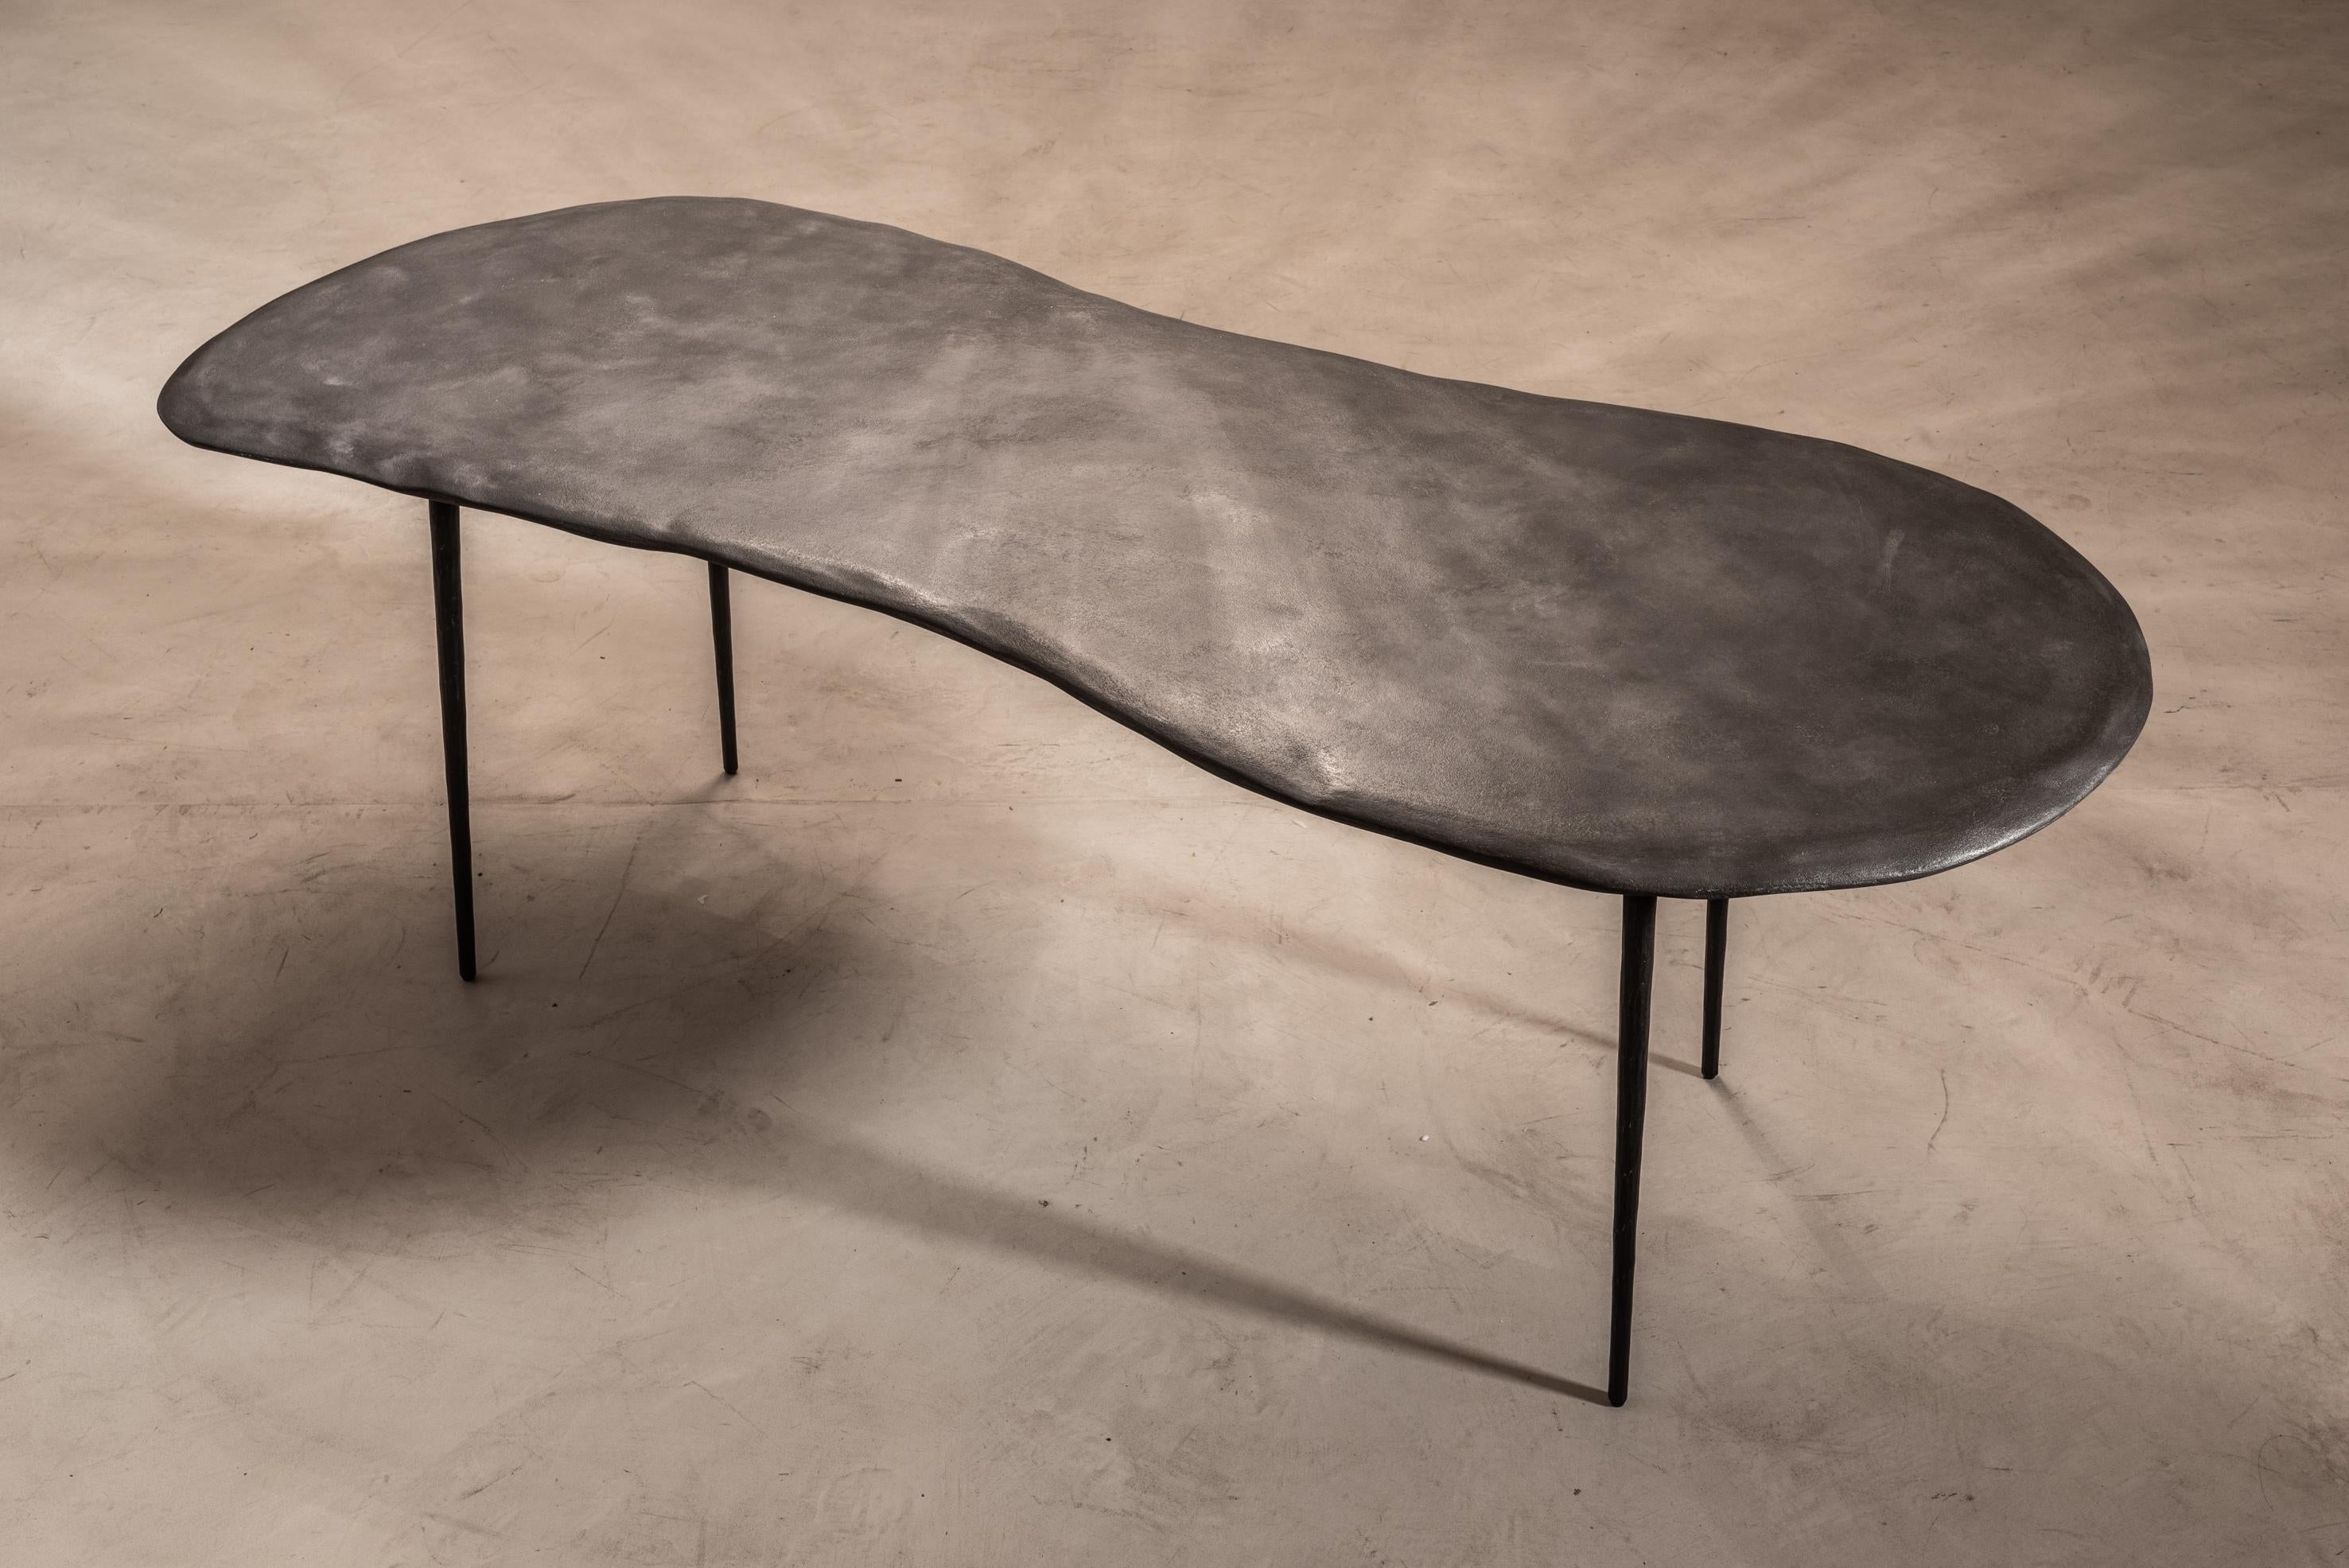 Varenna table B by Studio Emblématique
Dimensions: W 200 x D 85 x H 76 cm
Materials: Stonegrain table top with conical metal hammered legs

Pushing the boundaries, going the extra mile to find the extraordinary piece that defines the space.